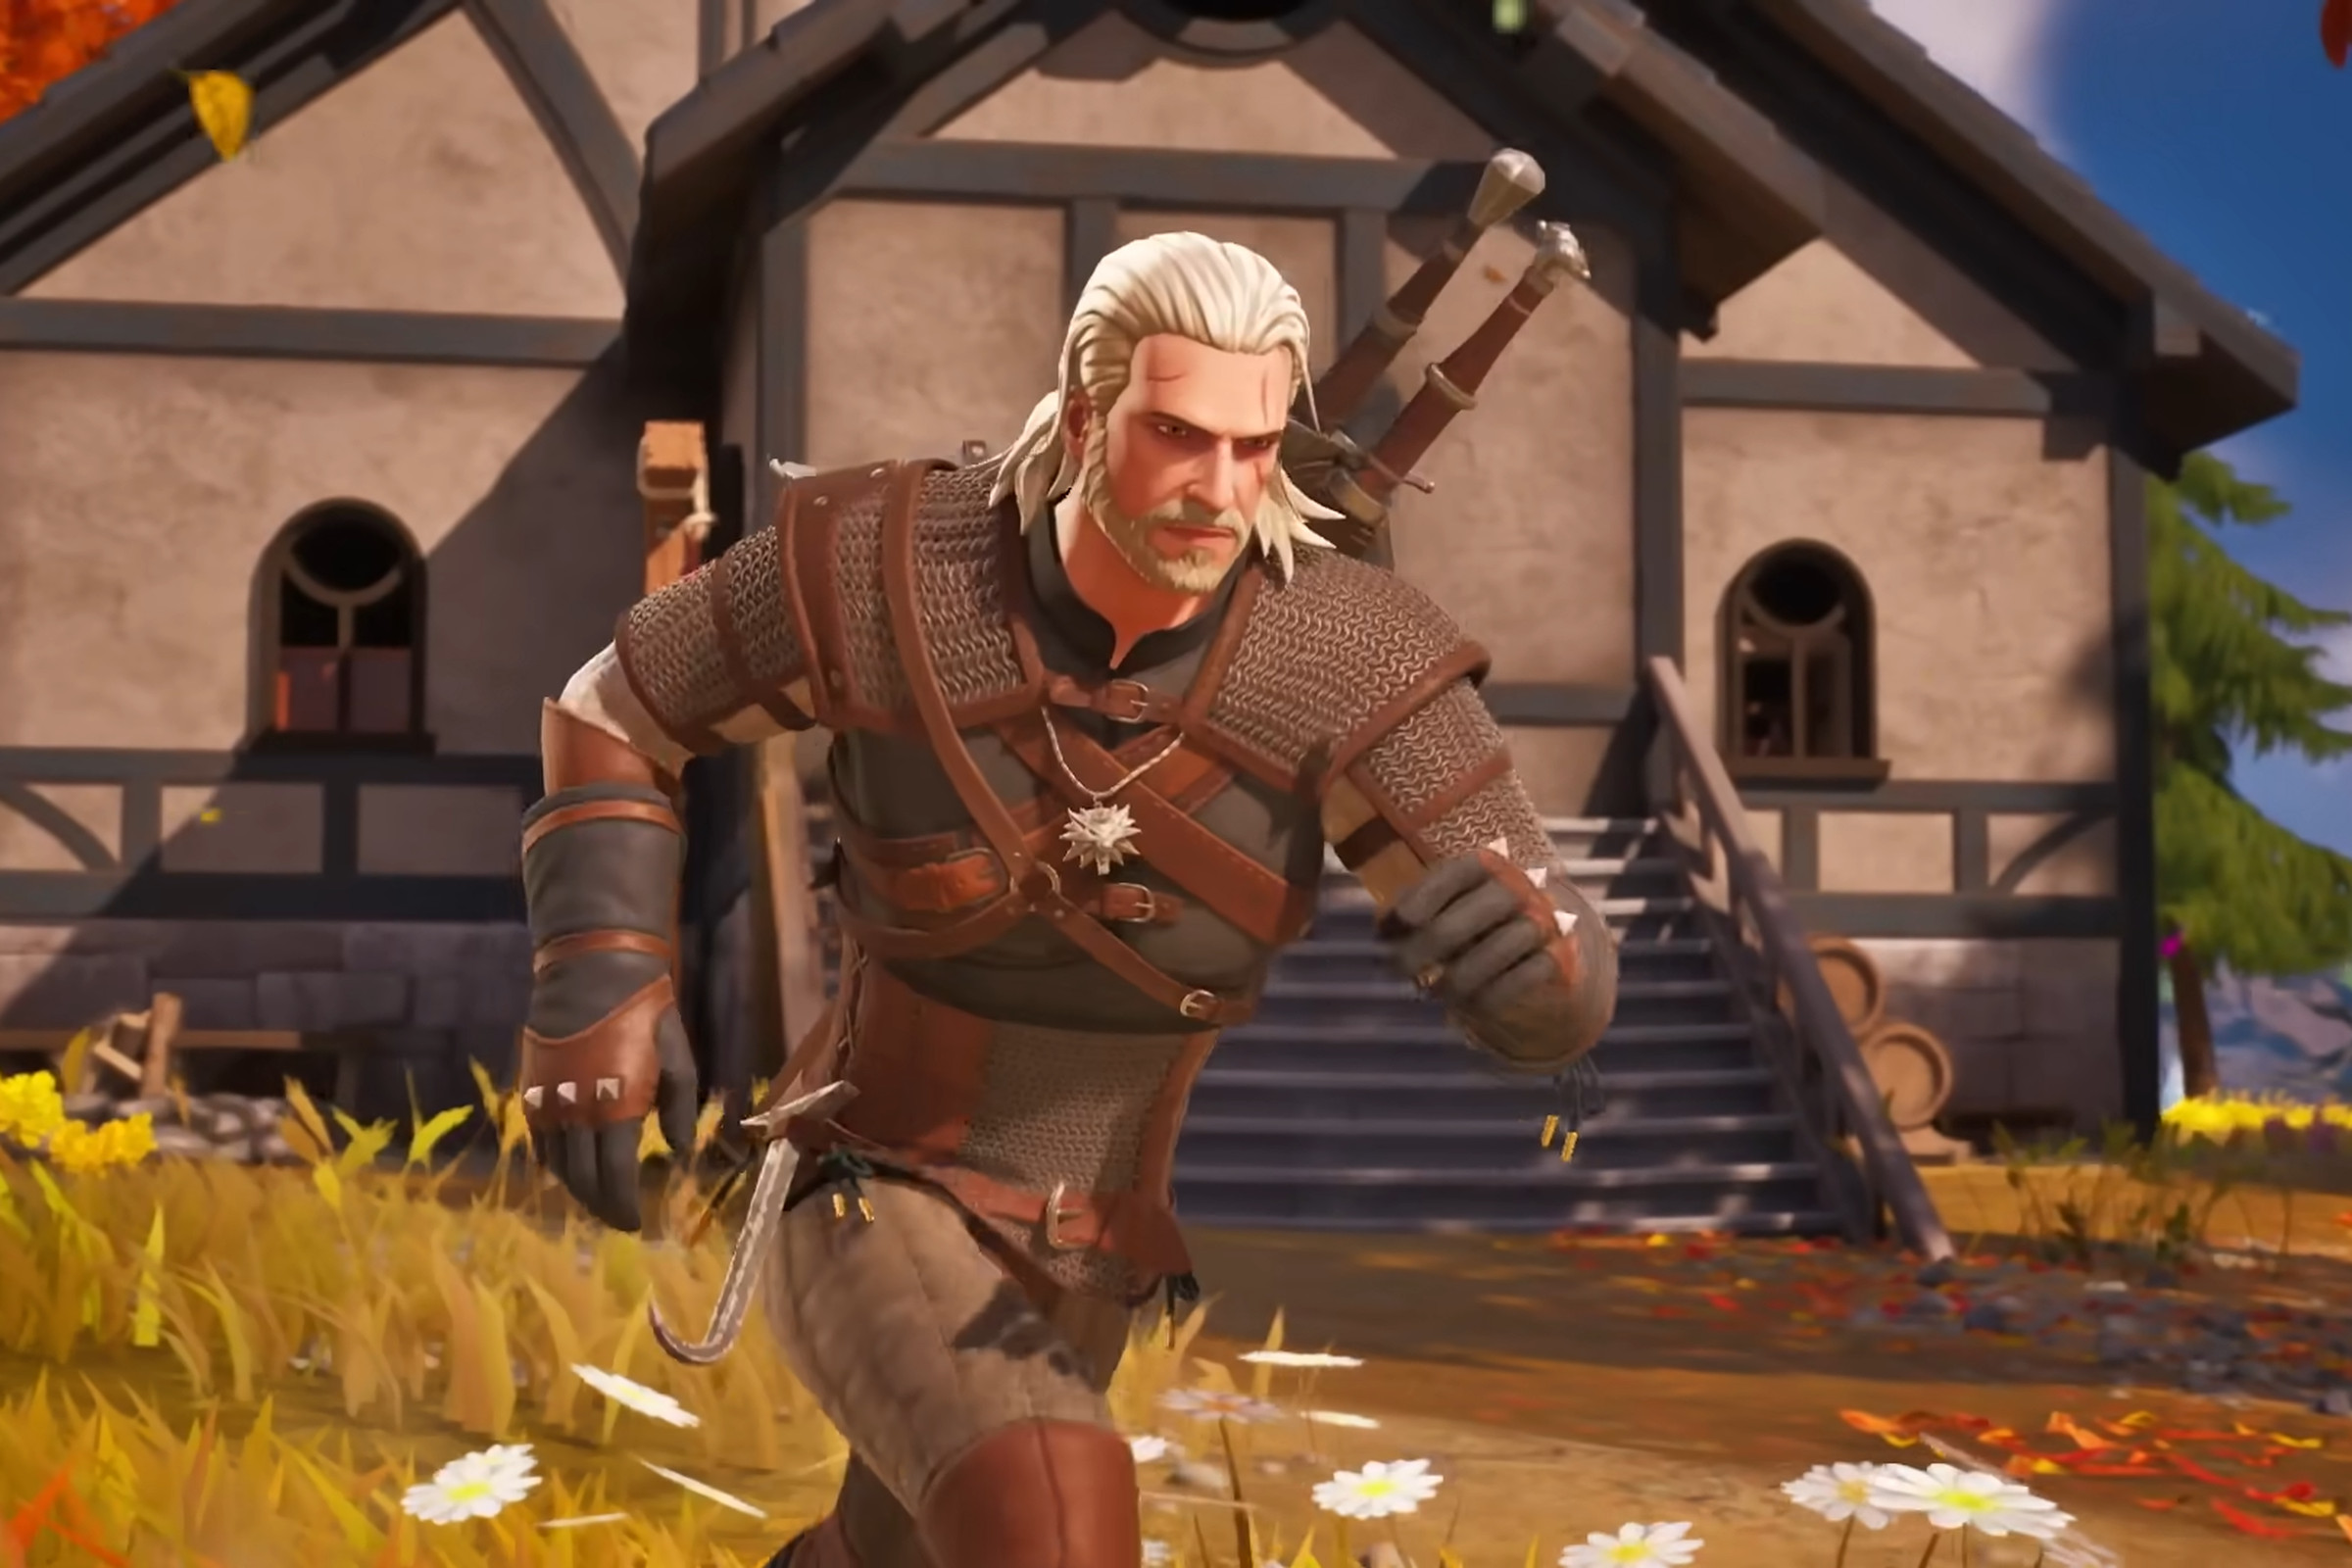 A screenshot of Geralt from The Witcher in Fortnite.